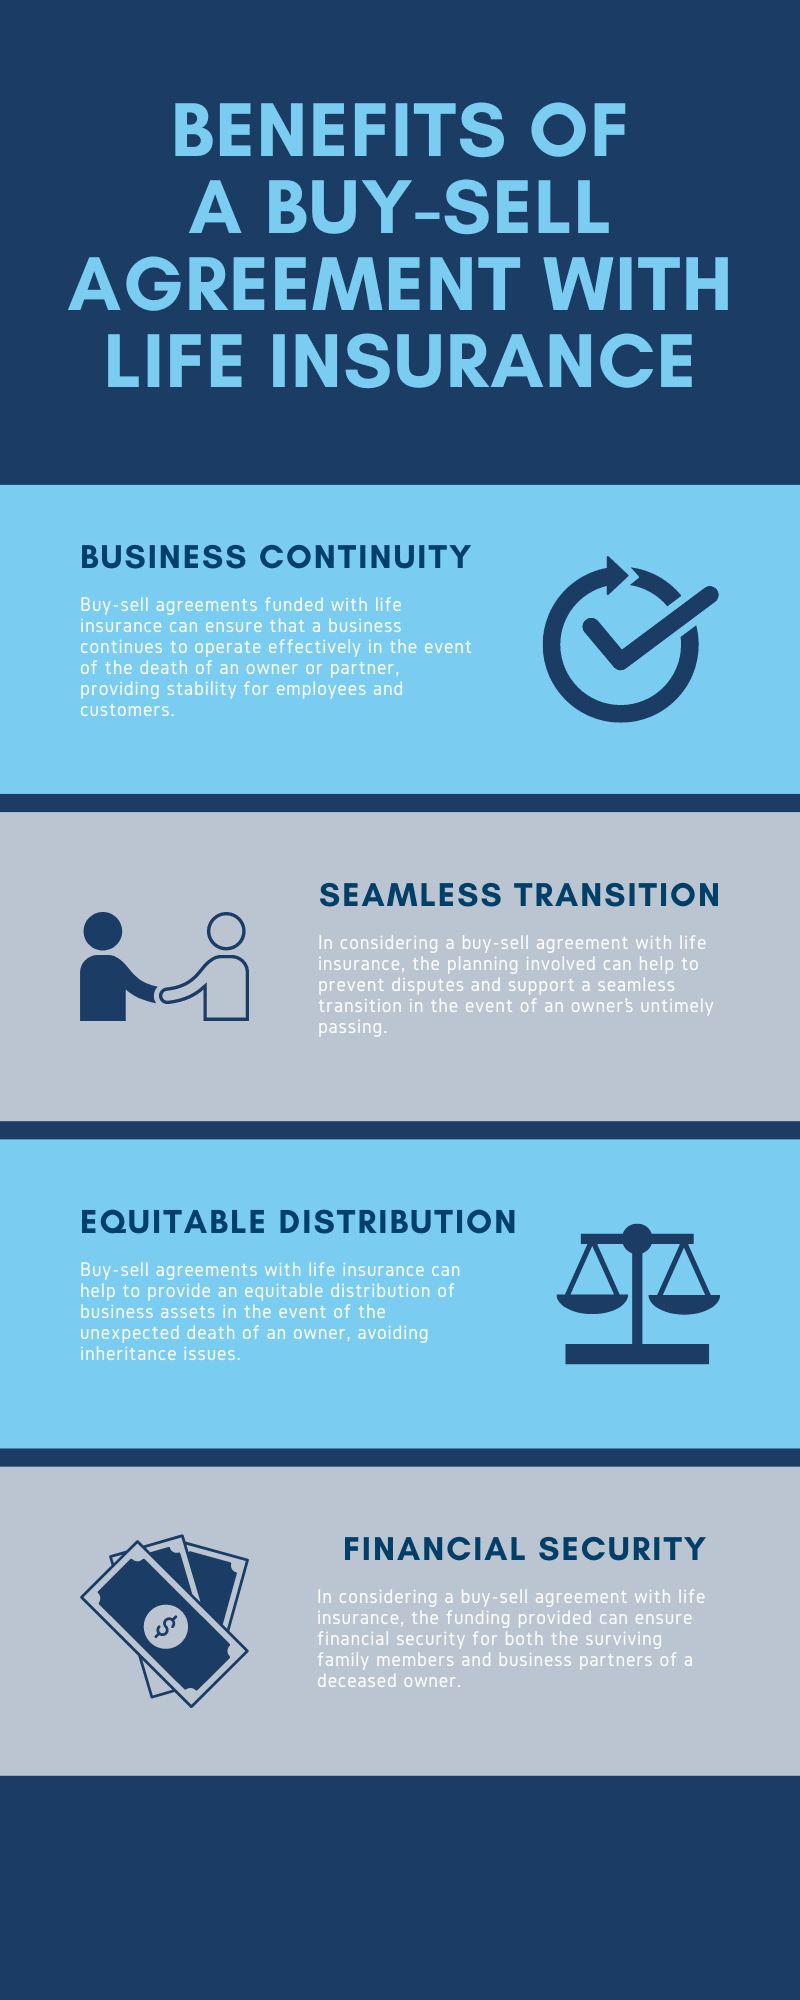 Benefits of a Buy-Sell Agreement with Life Insurance infographic